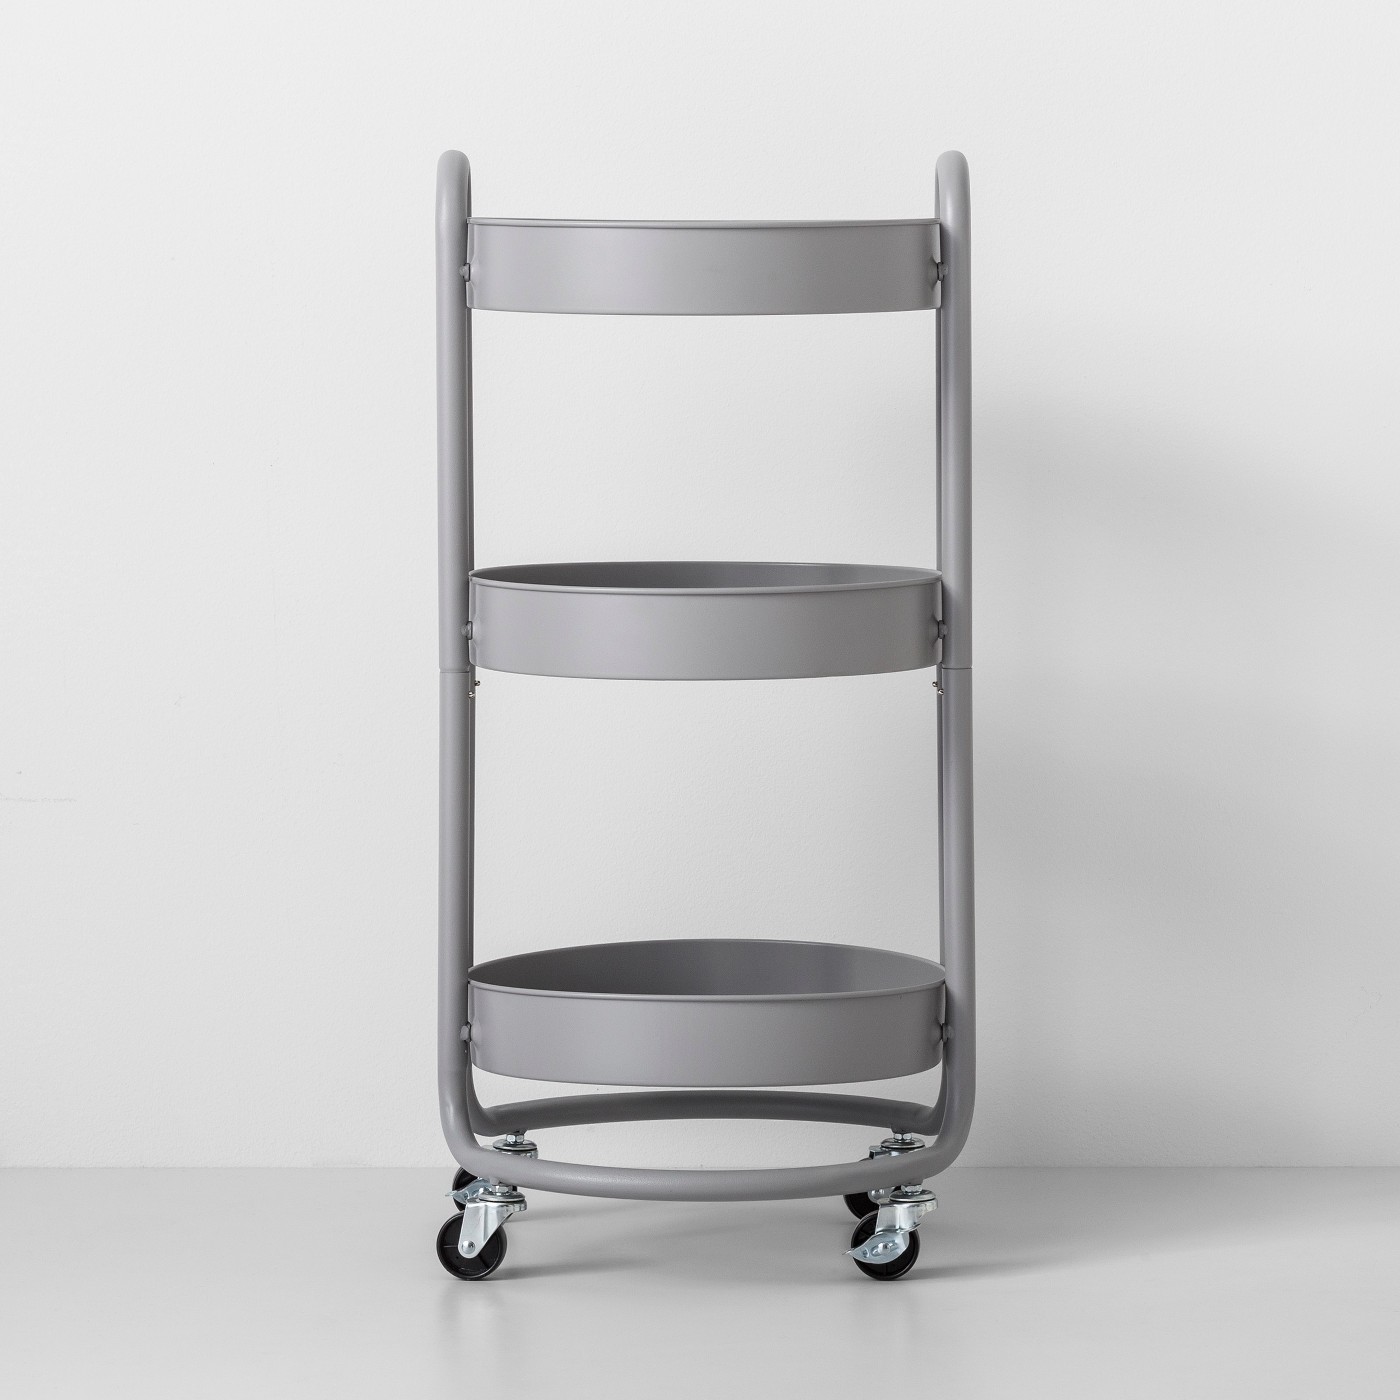 Round Metal Utility Cart Gray - Made By Designâ„¢ - image 1 of 3